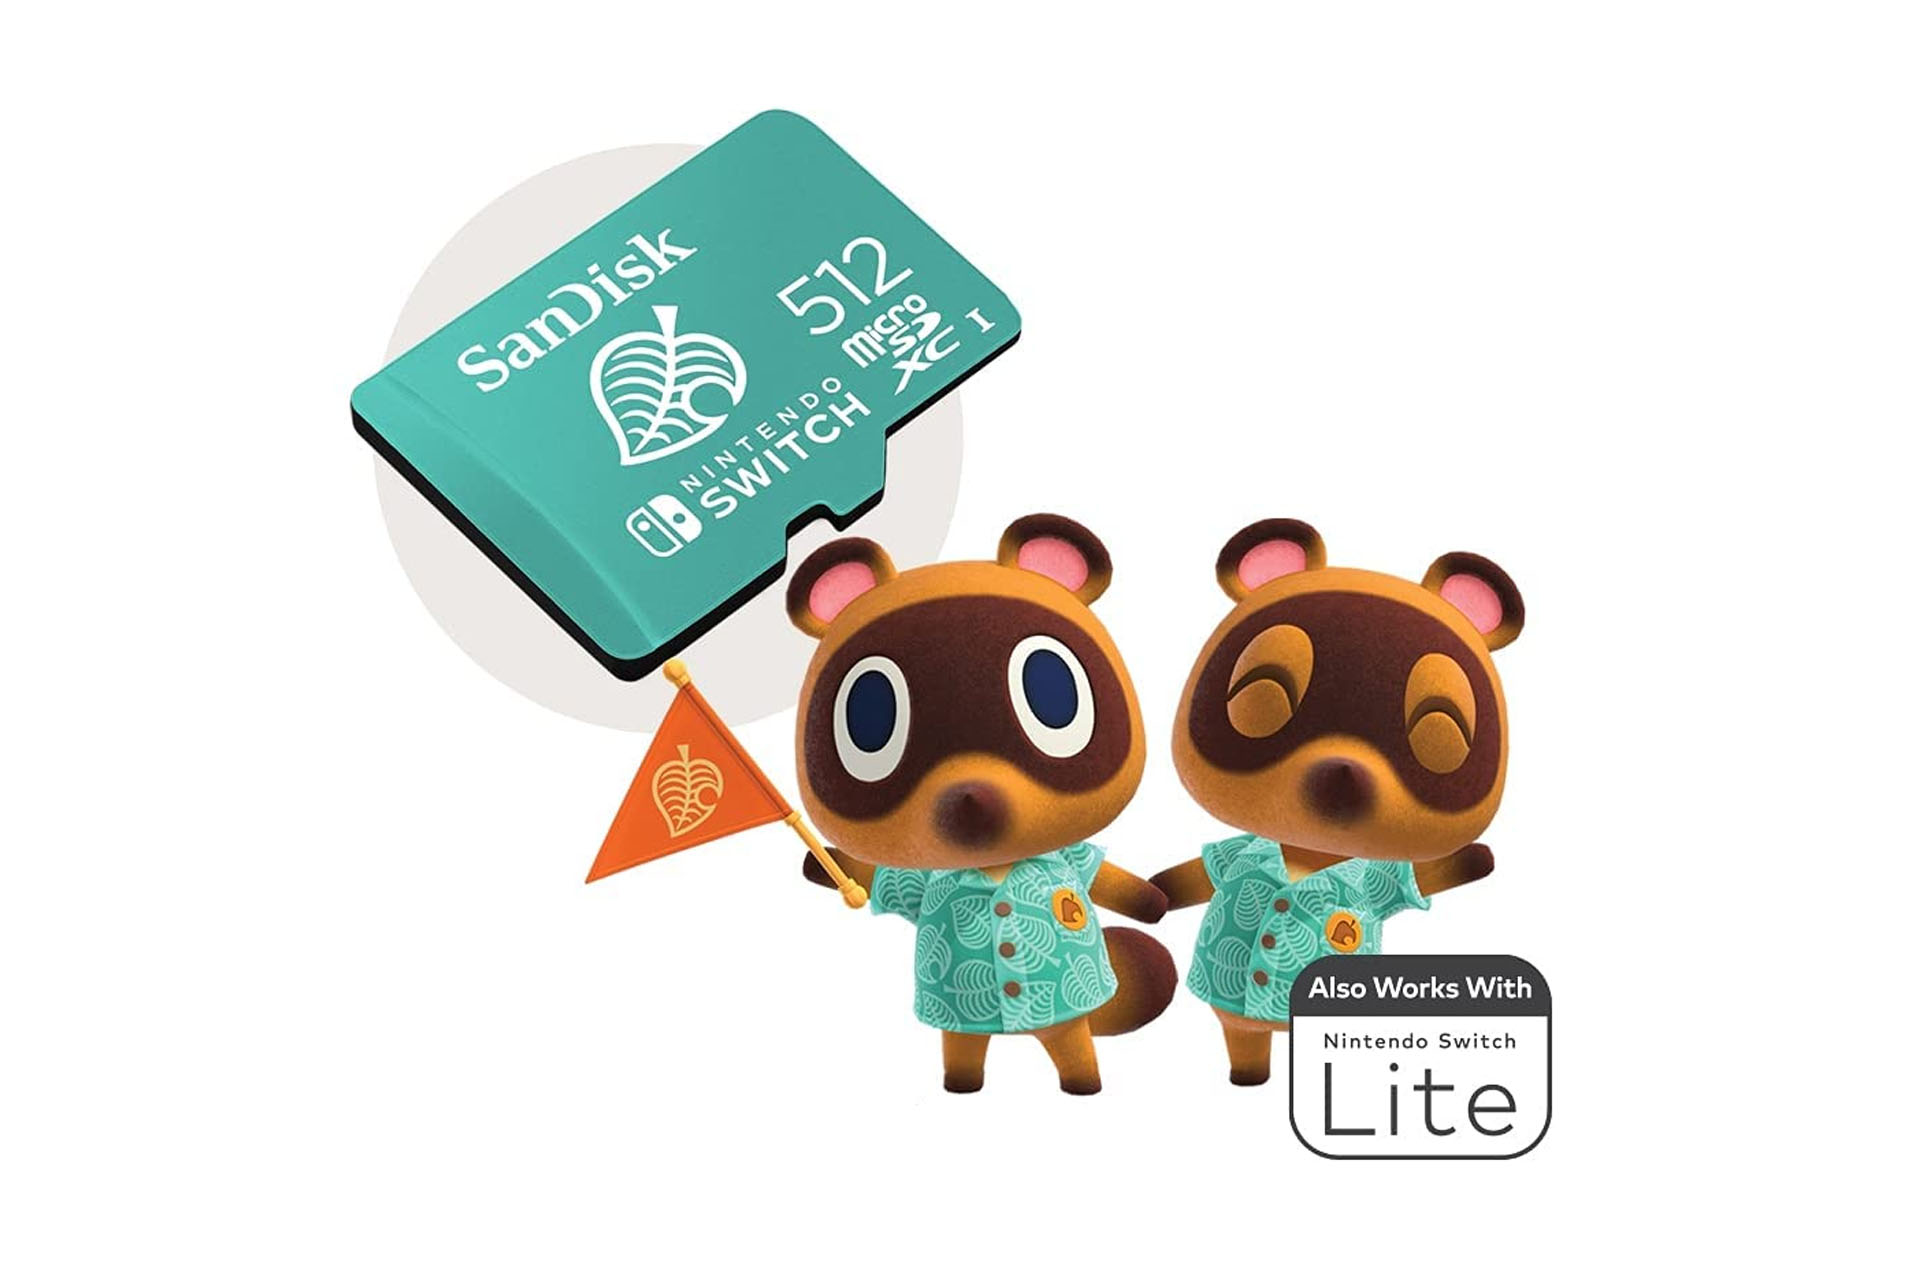 A product shot of the Animal Crossing themed SanDisk Micro SD 512GB card with 2 Animal Crossing characters